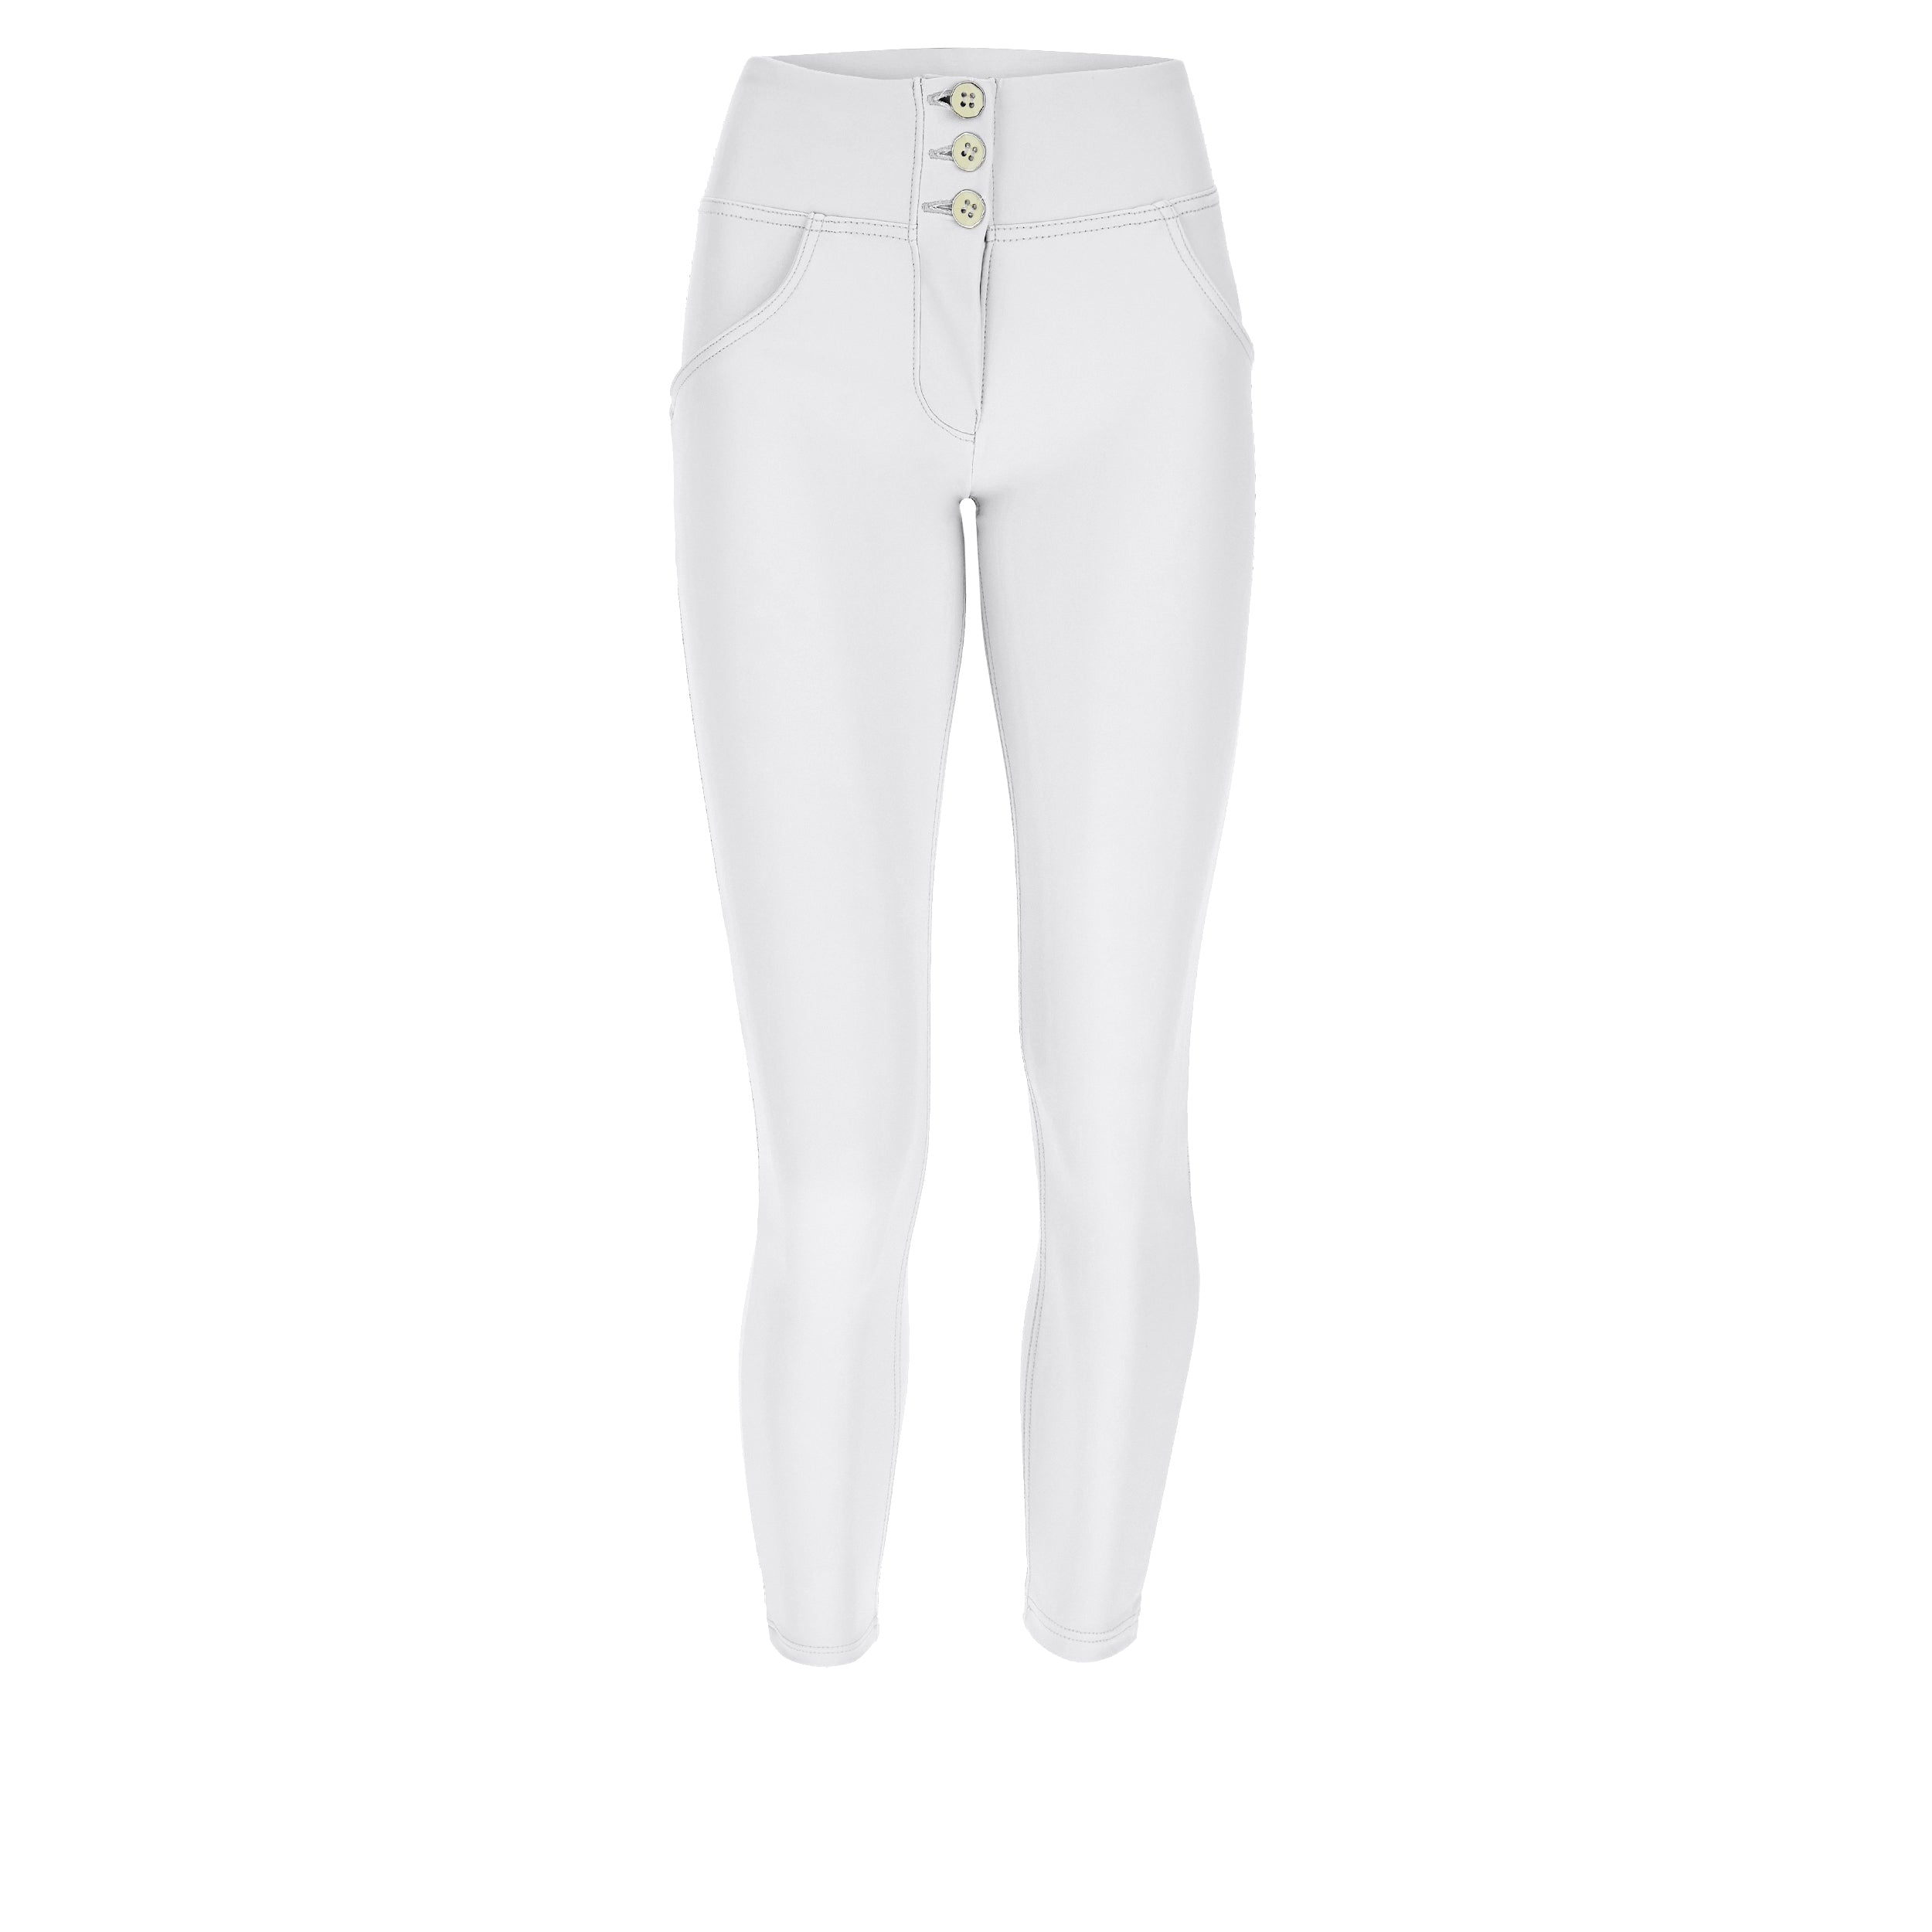 mid waist freddy faux leather look nepleer enkel lengte ankle length push up shaping trousers pants broek wit white